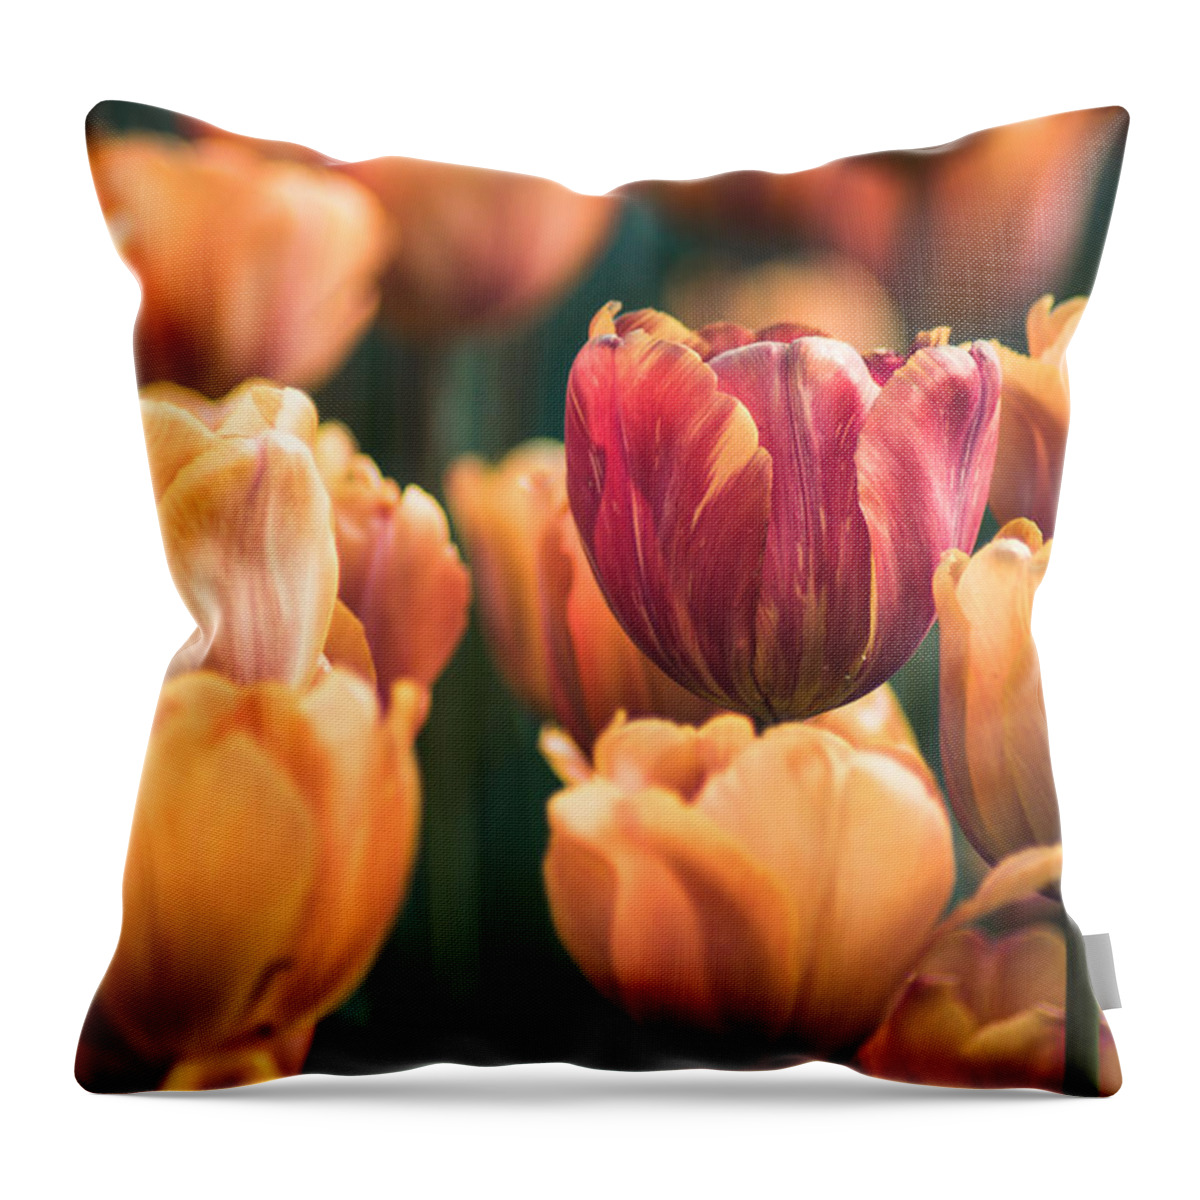 Orange Throw Pillow featuring the photograph Exotic Flavor by Bill Pevlor